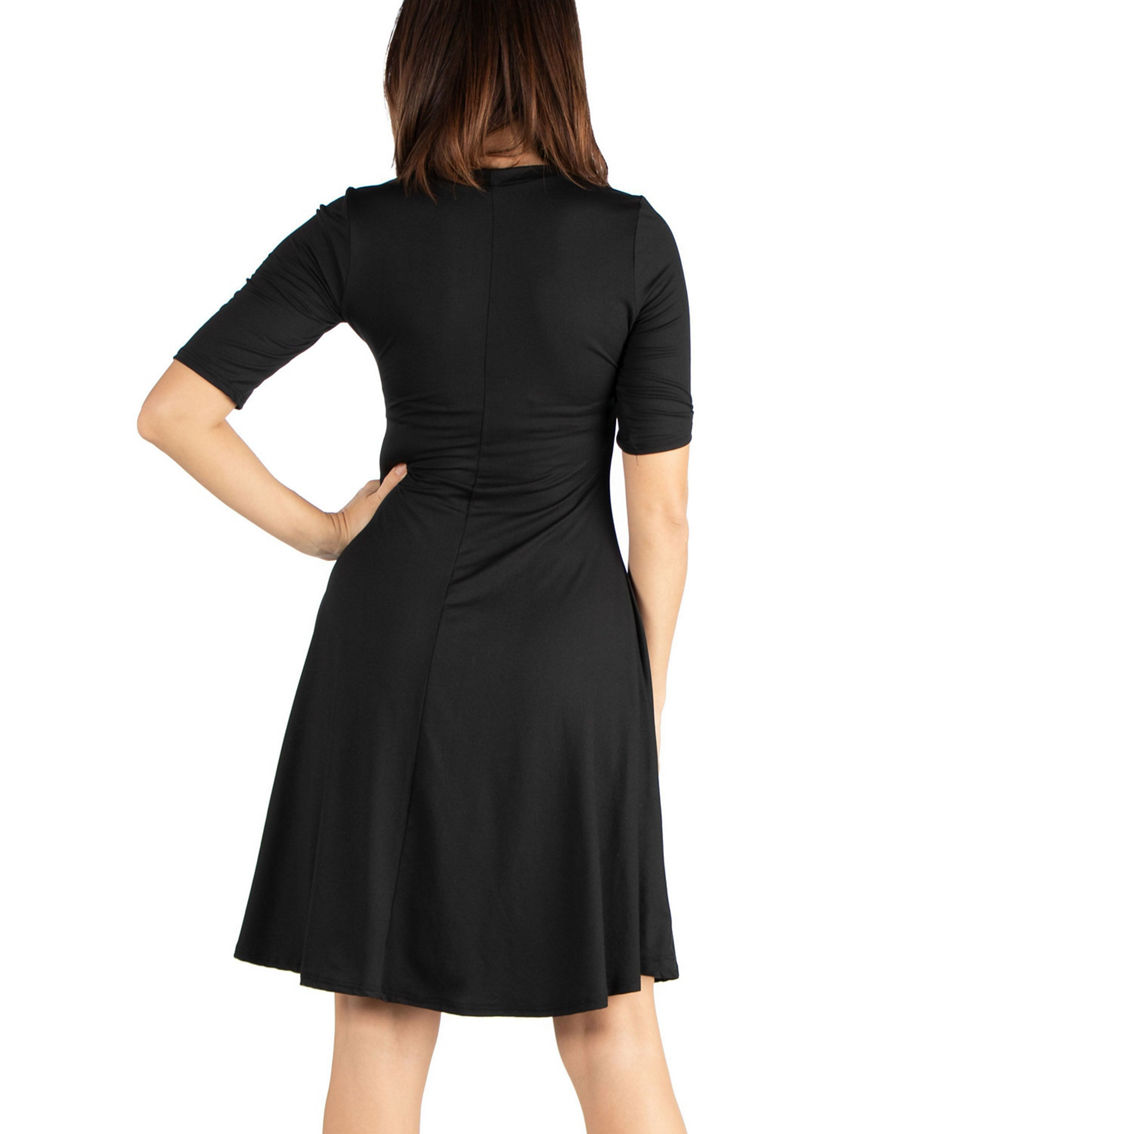 24seven Comfort Apparel A Line Knee Length Dress Elbow Length Sleeves - Image 3 of 4